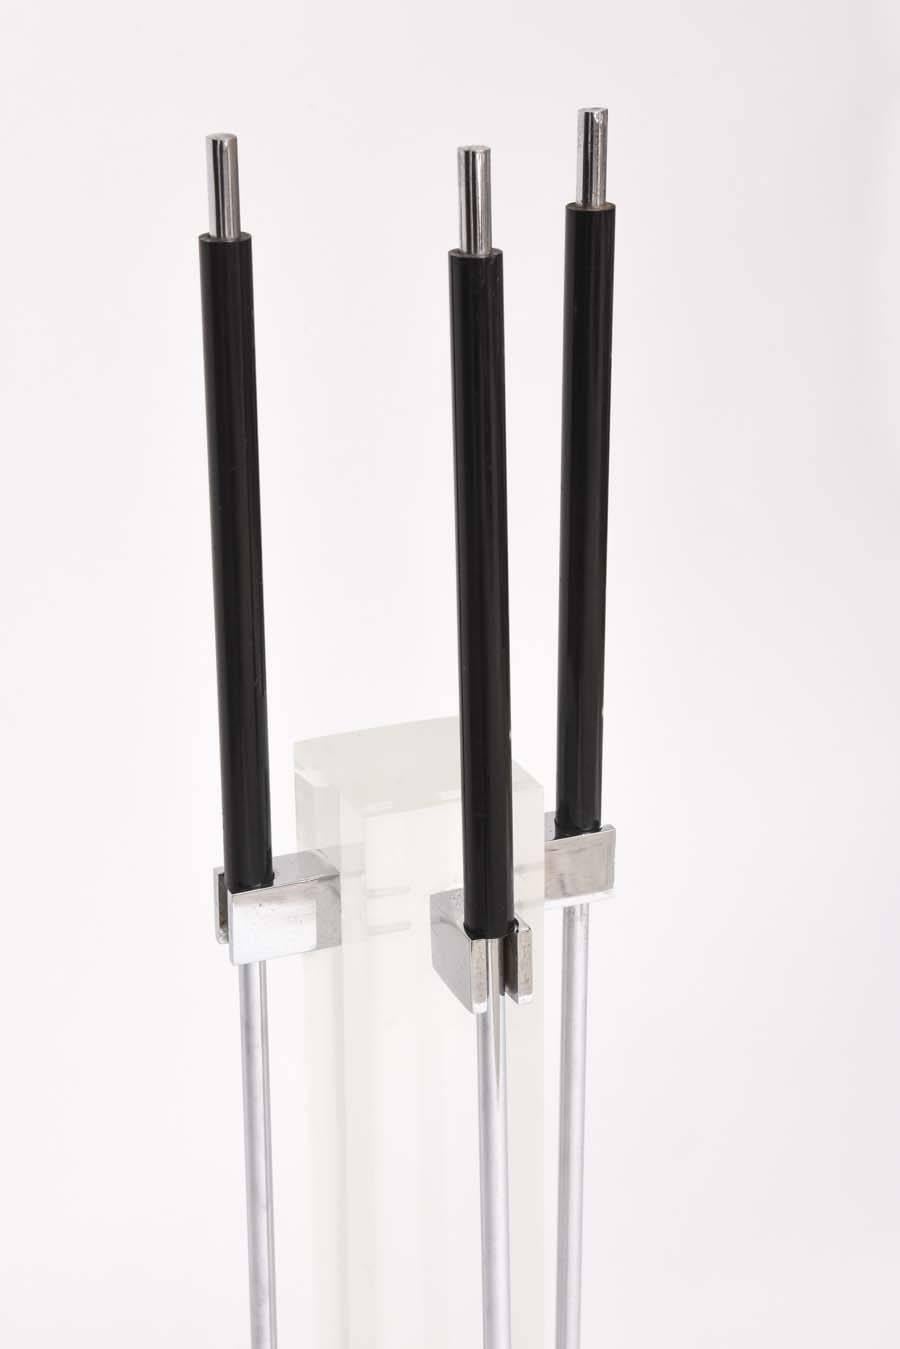 American Danny Alessandro Style Fire-Tool Set in Polished Chrome and Black Lucite, 1980s